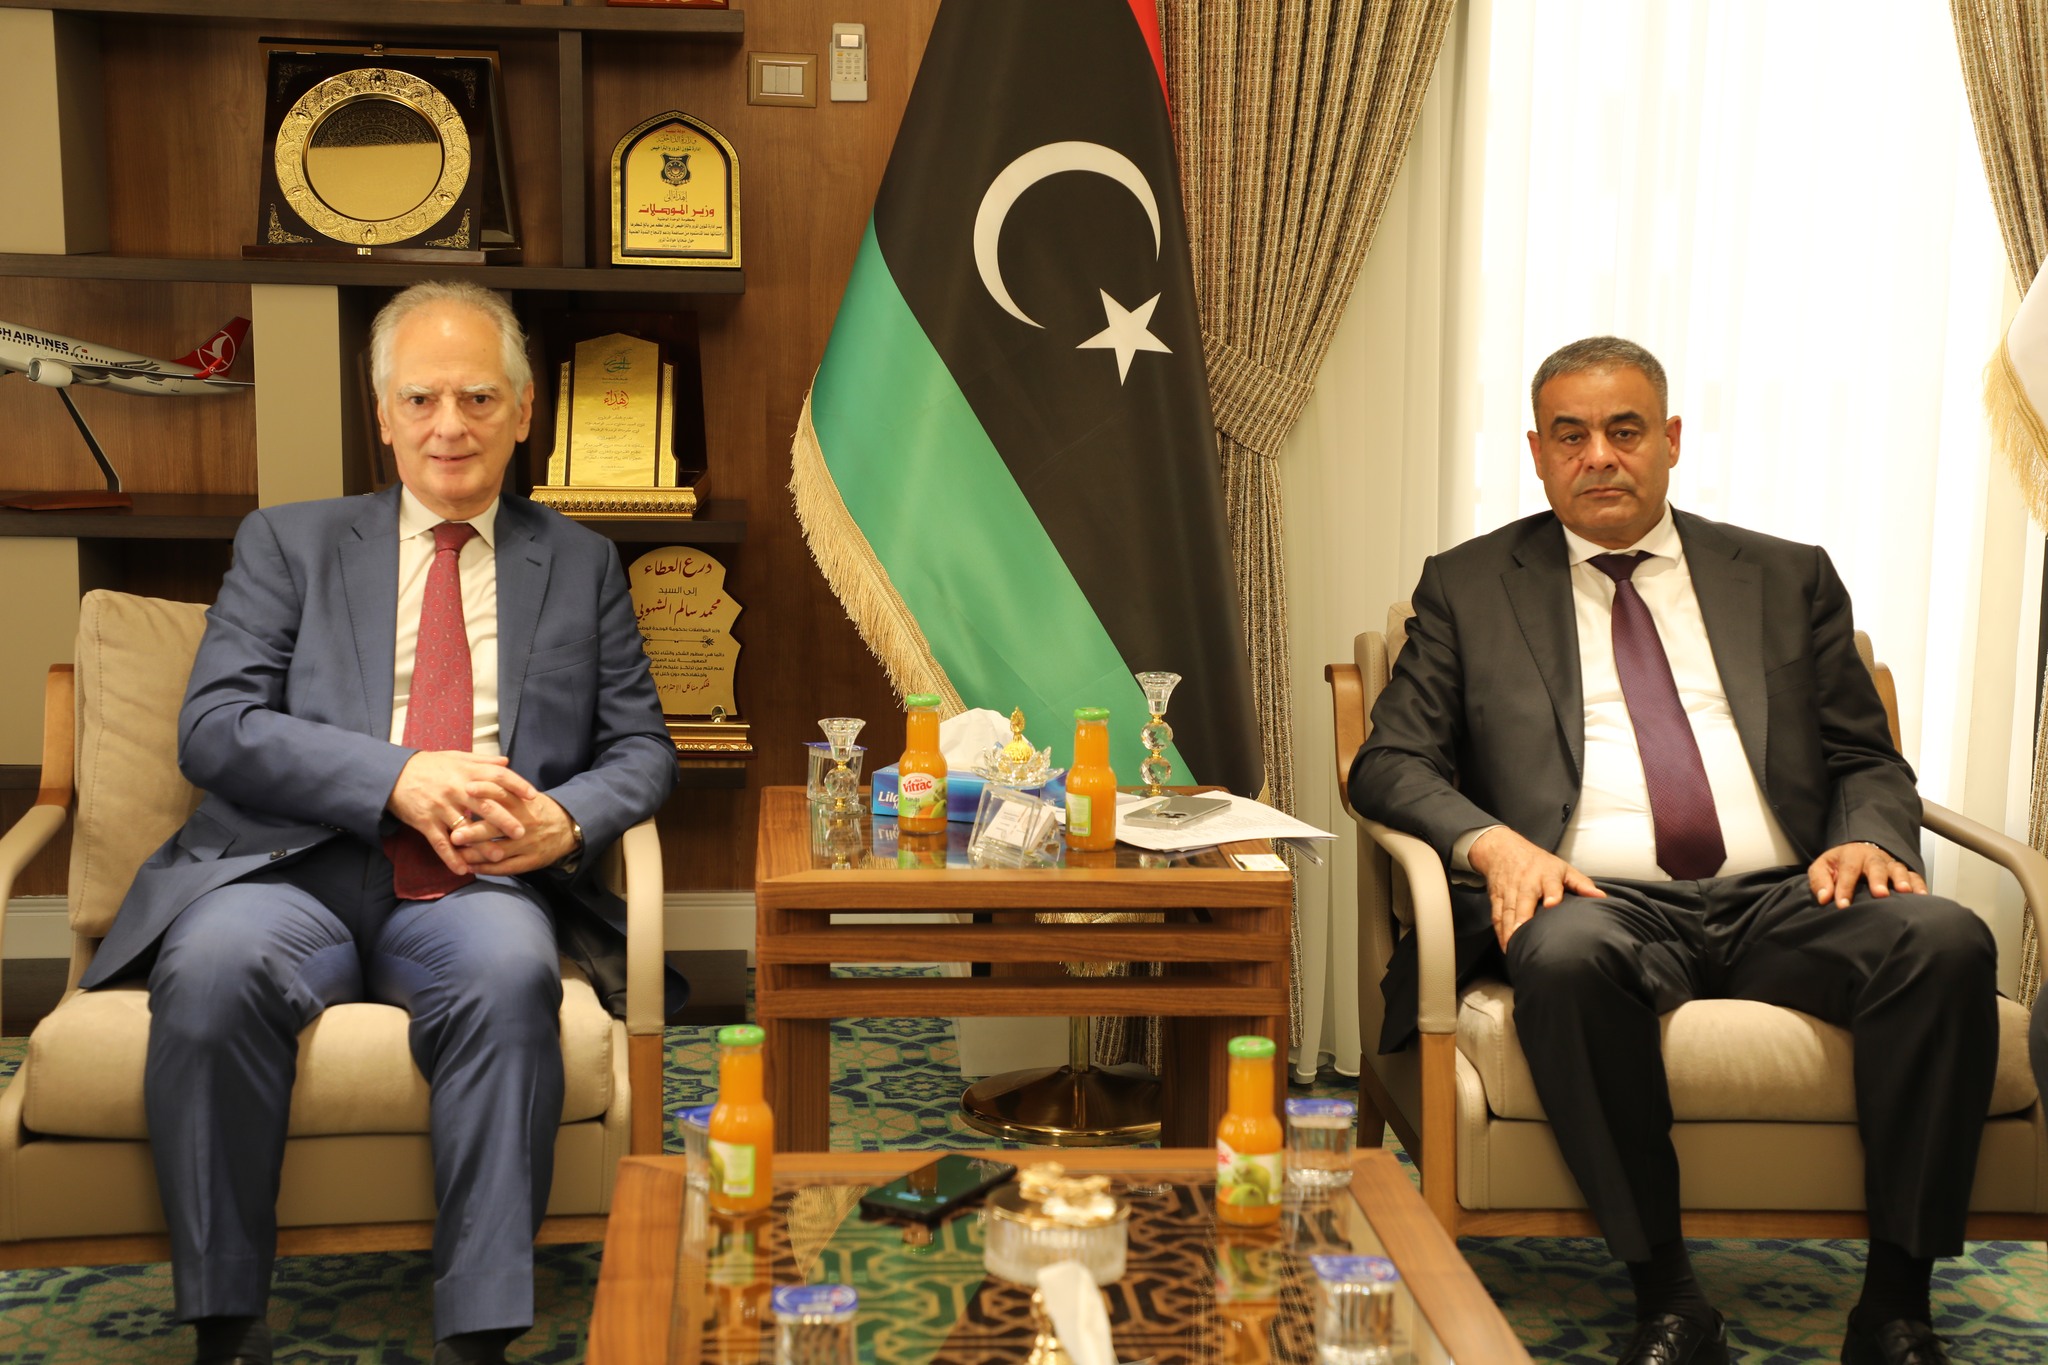 The Minister of Transportation calls on Greek companies to work in Libya and the return of flights to Libyan airports.